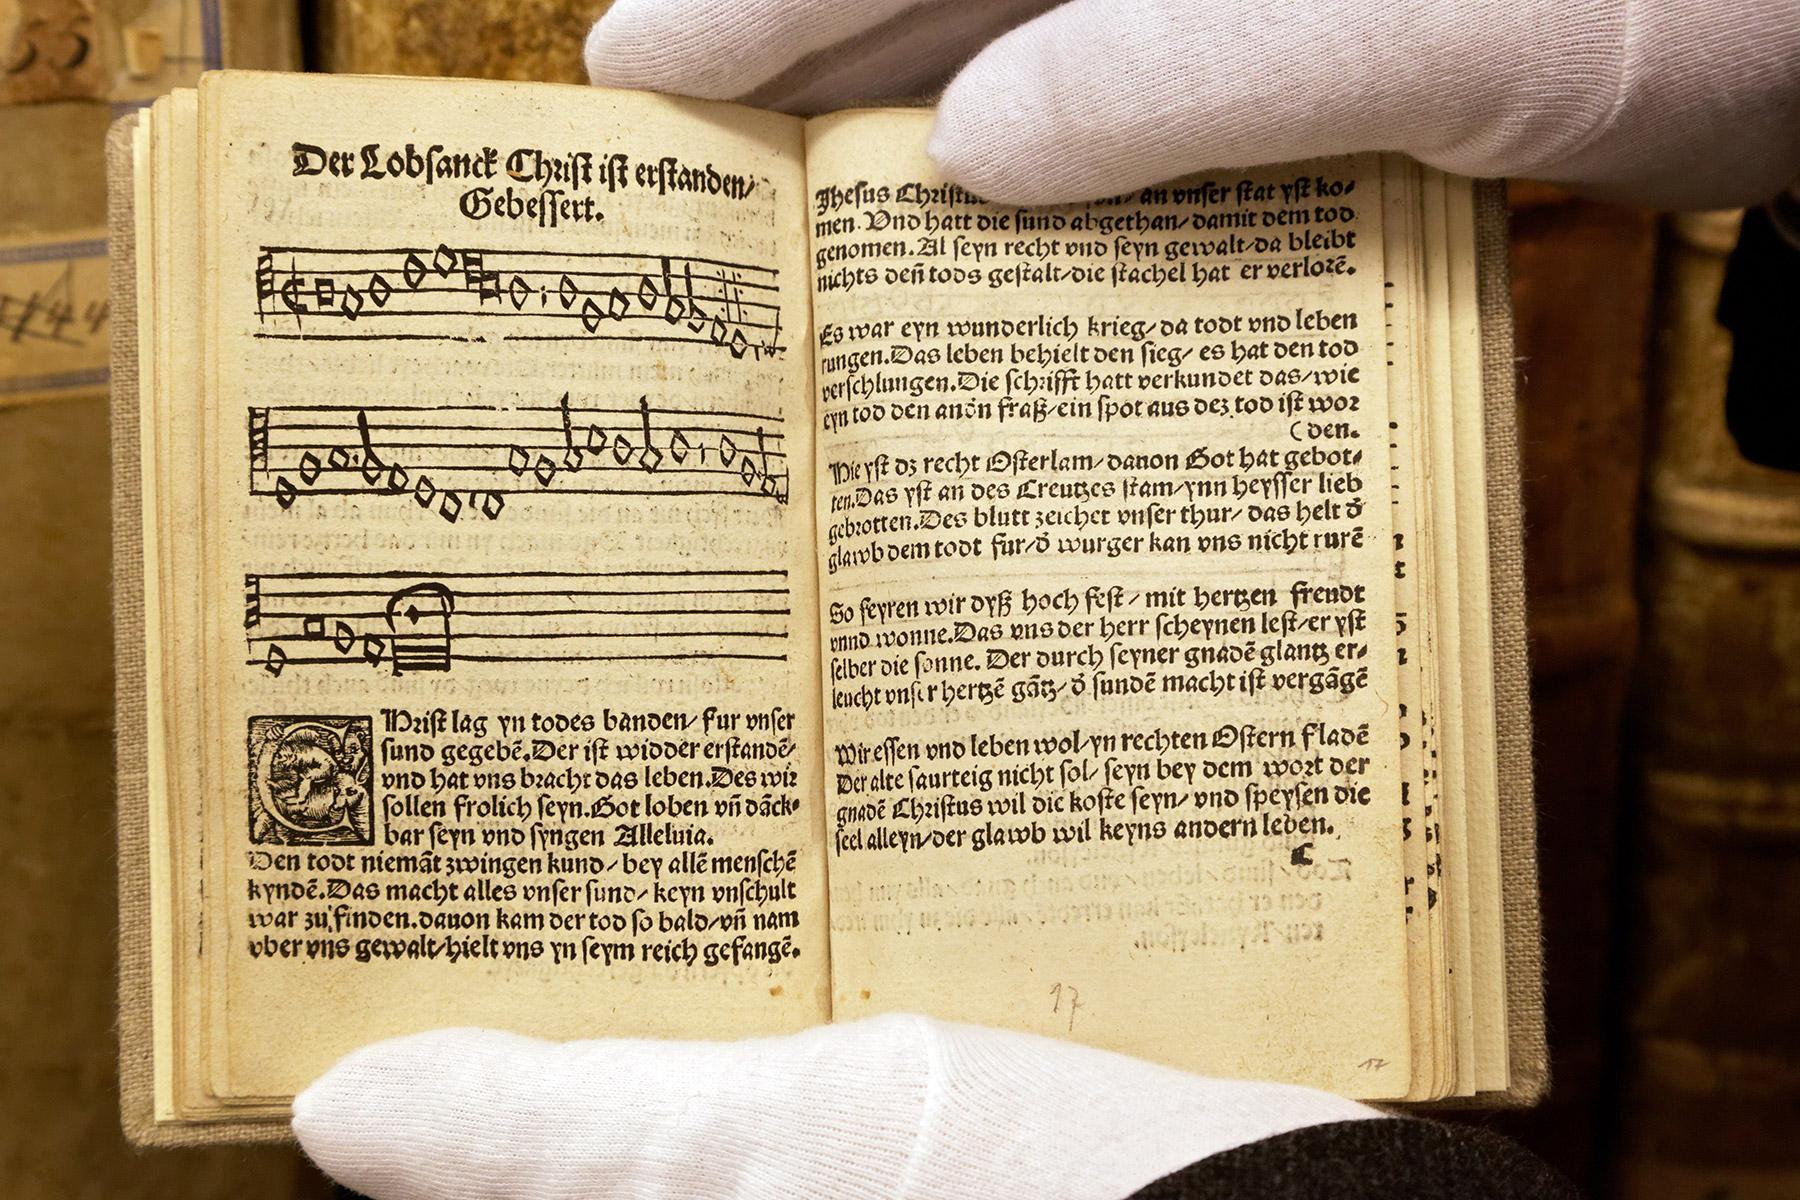 The “Erfurter Färbefaß-Enchiridion” is the oldest existing Protestant hymnal. The pages show the Easter hymn “Christ is risen”. The sheet music bears witness to the first hymns of the reformer Martin Luther. The Enchiridion was printed in Erfurt, Germany, in 1524. Photo: epd/Hans-Jörg Hörseljau